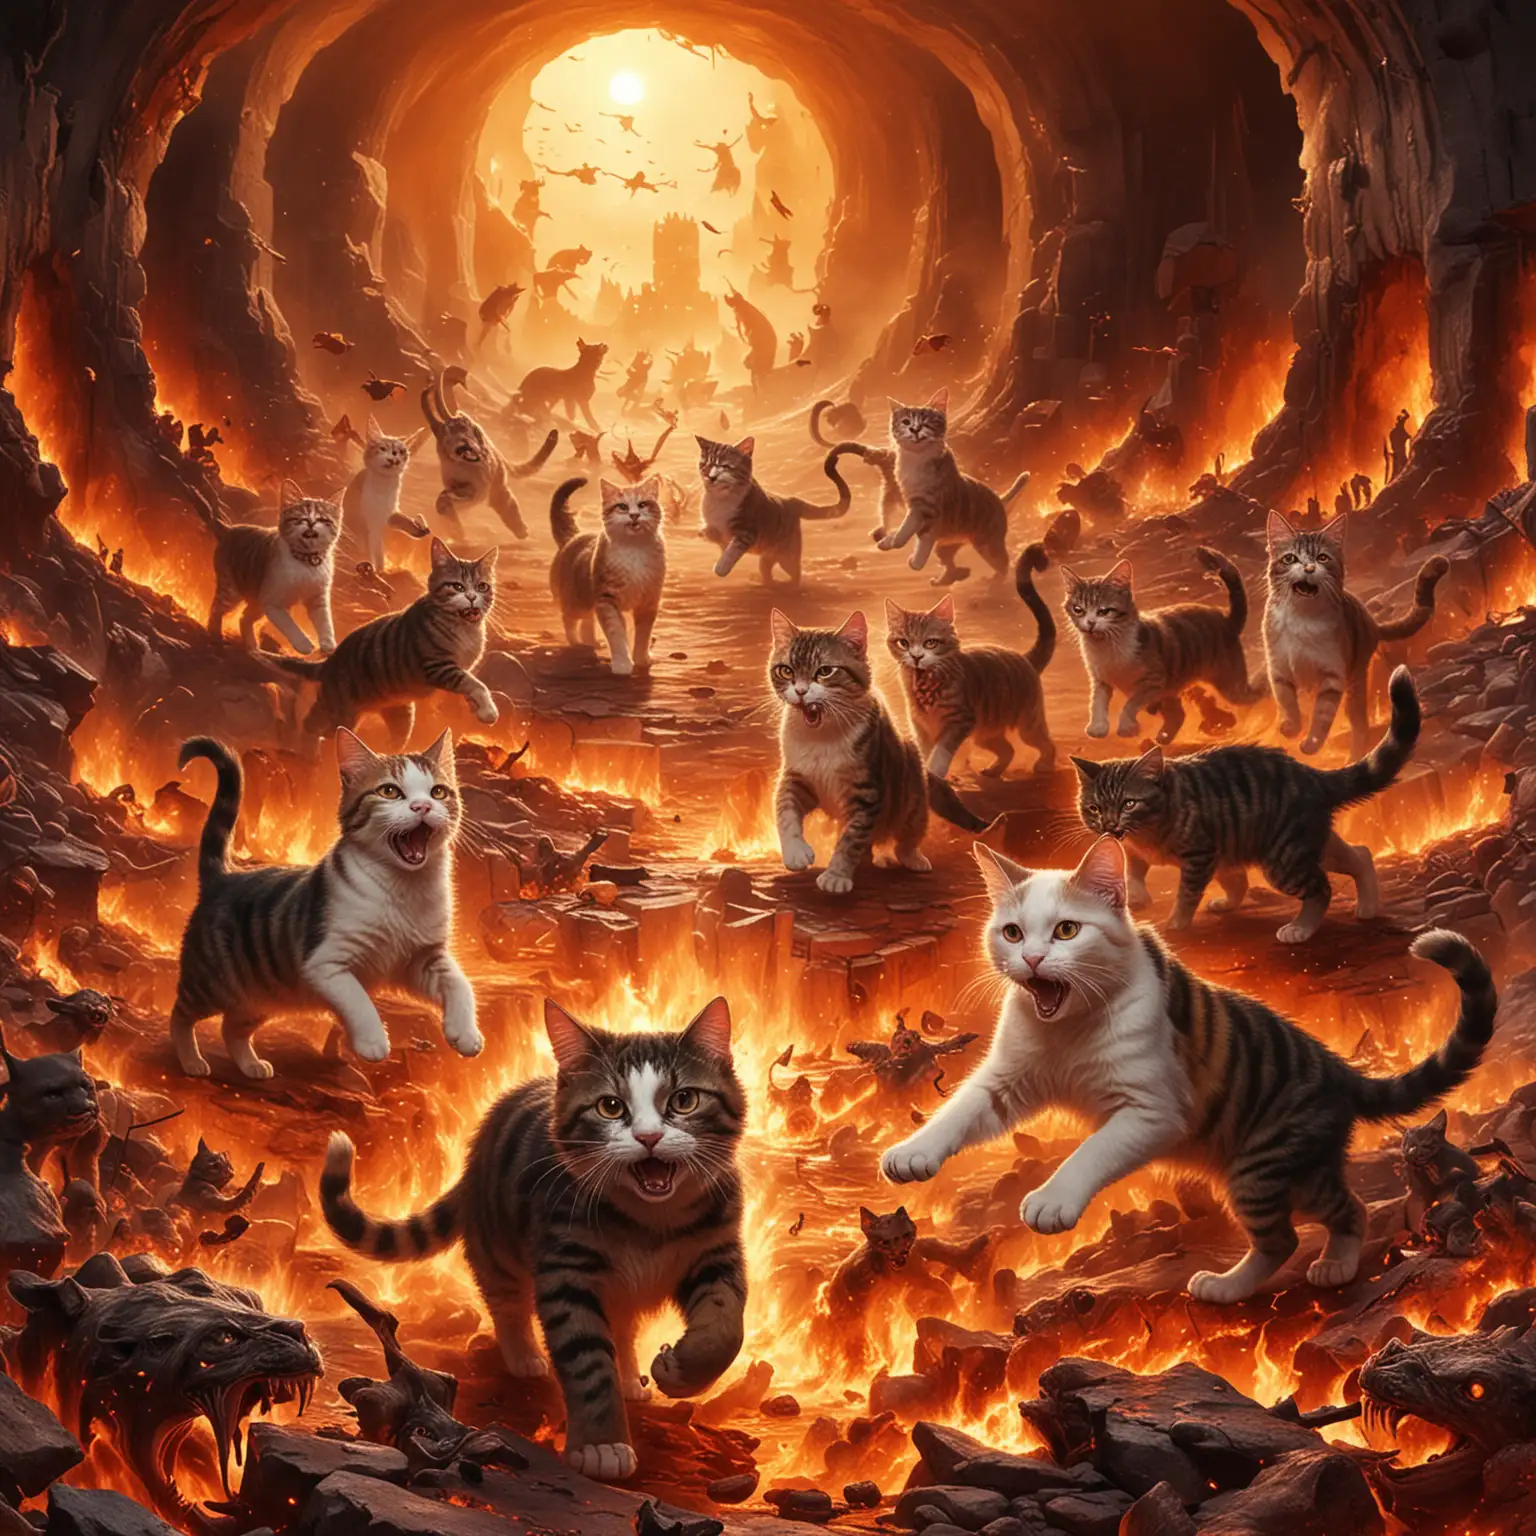 Playful Cats in Hellish Setting